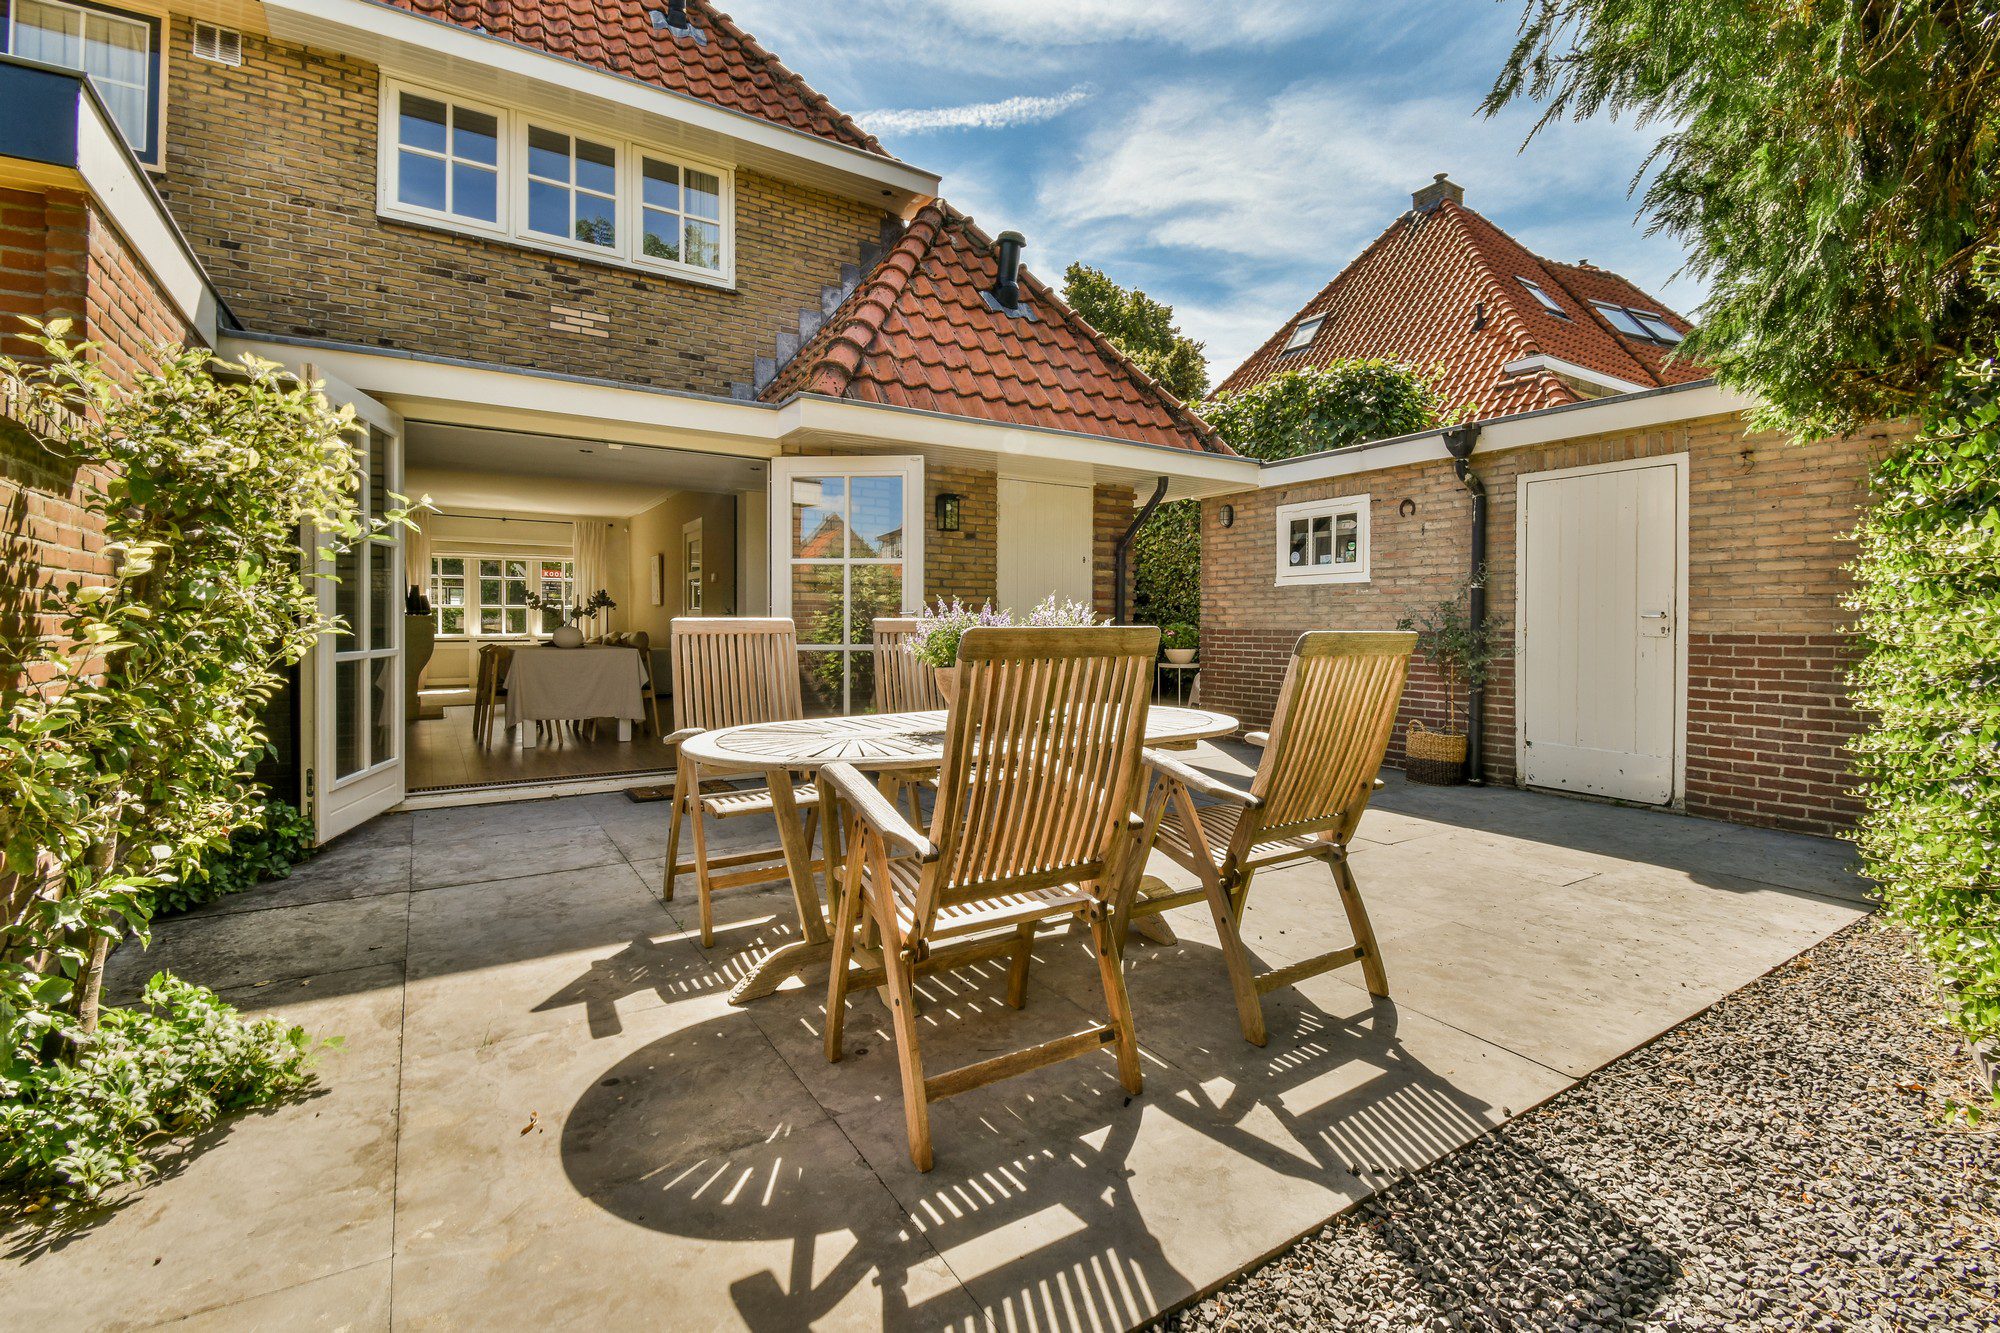 The image shows a sunny backyard patio area of a residential house. The patio is paved and features a wooden outdoor dining set with a round table and four chairs. The garden around the patio is landscaped with a mix of paving stones, gravel, and some plants. The house has a traditional design with brick walls and a tiled roof. A set of opened French doors leads from the inside dining area to the patio, suggesting a seamless integration of indoor and outdoor spaces. The sky is blue with a few clouds, indicating nice weather. It looks like an inviting space for dining, entertaining, or simply enjoying the outdoors.